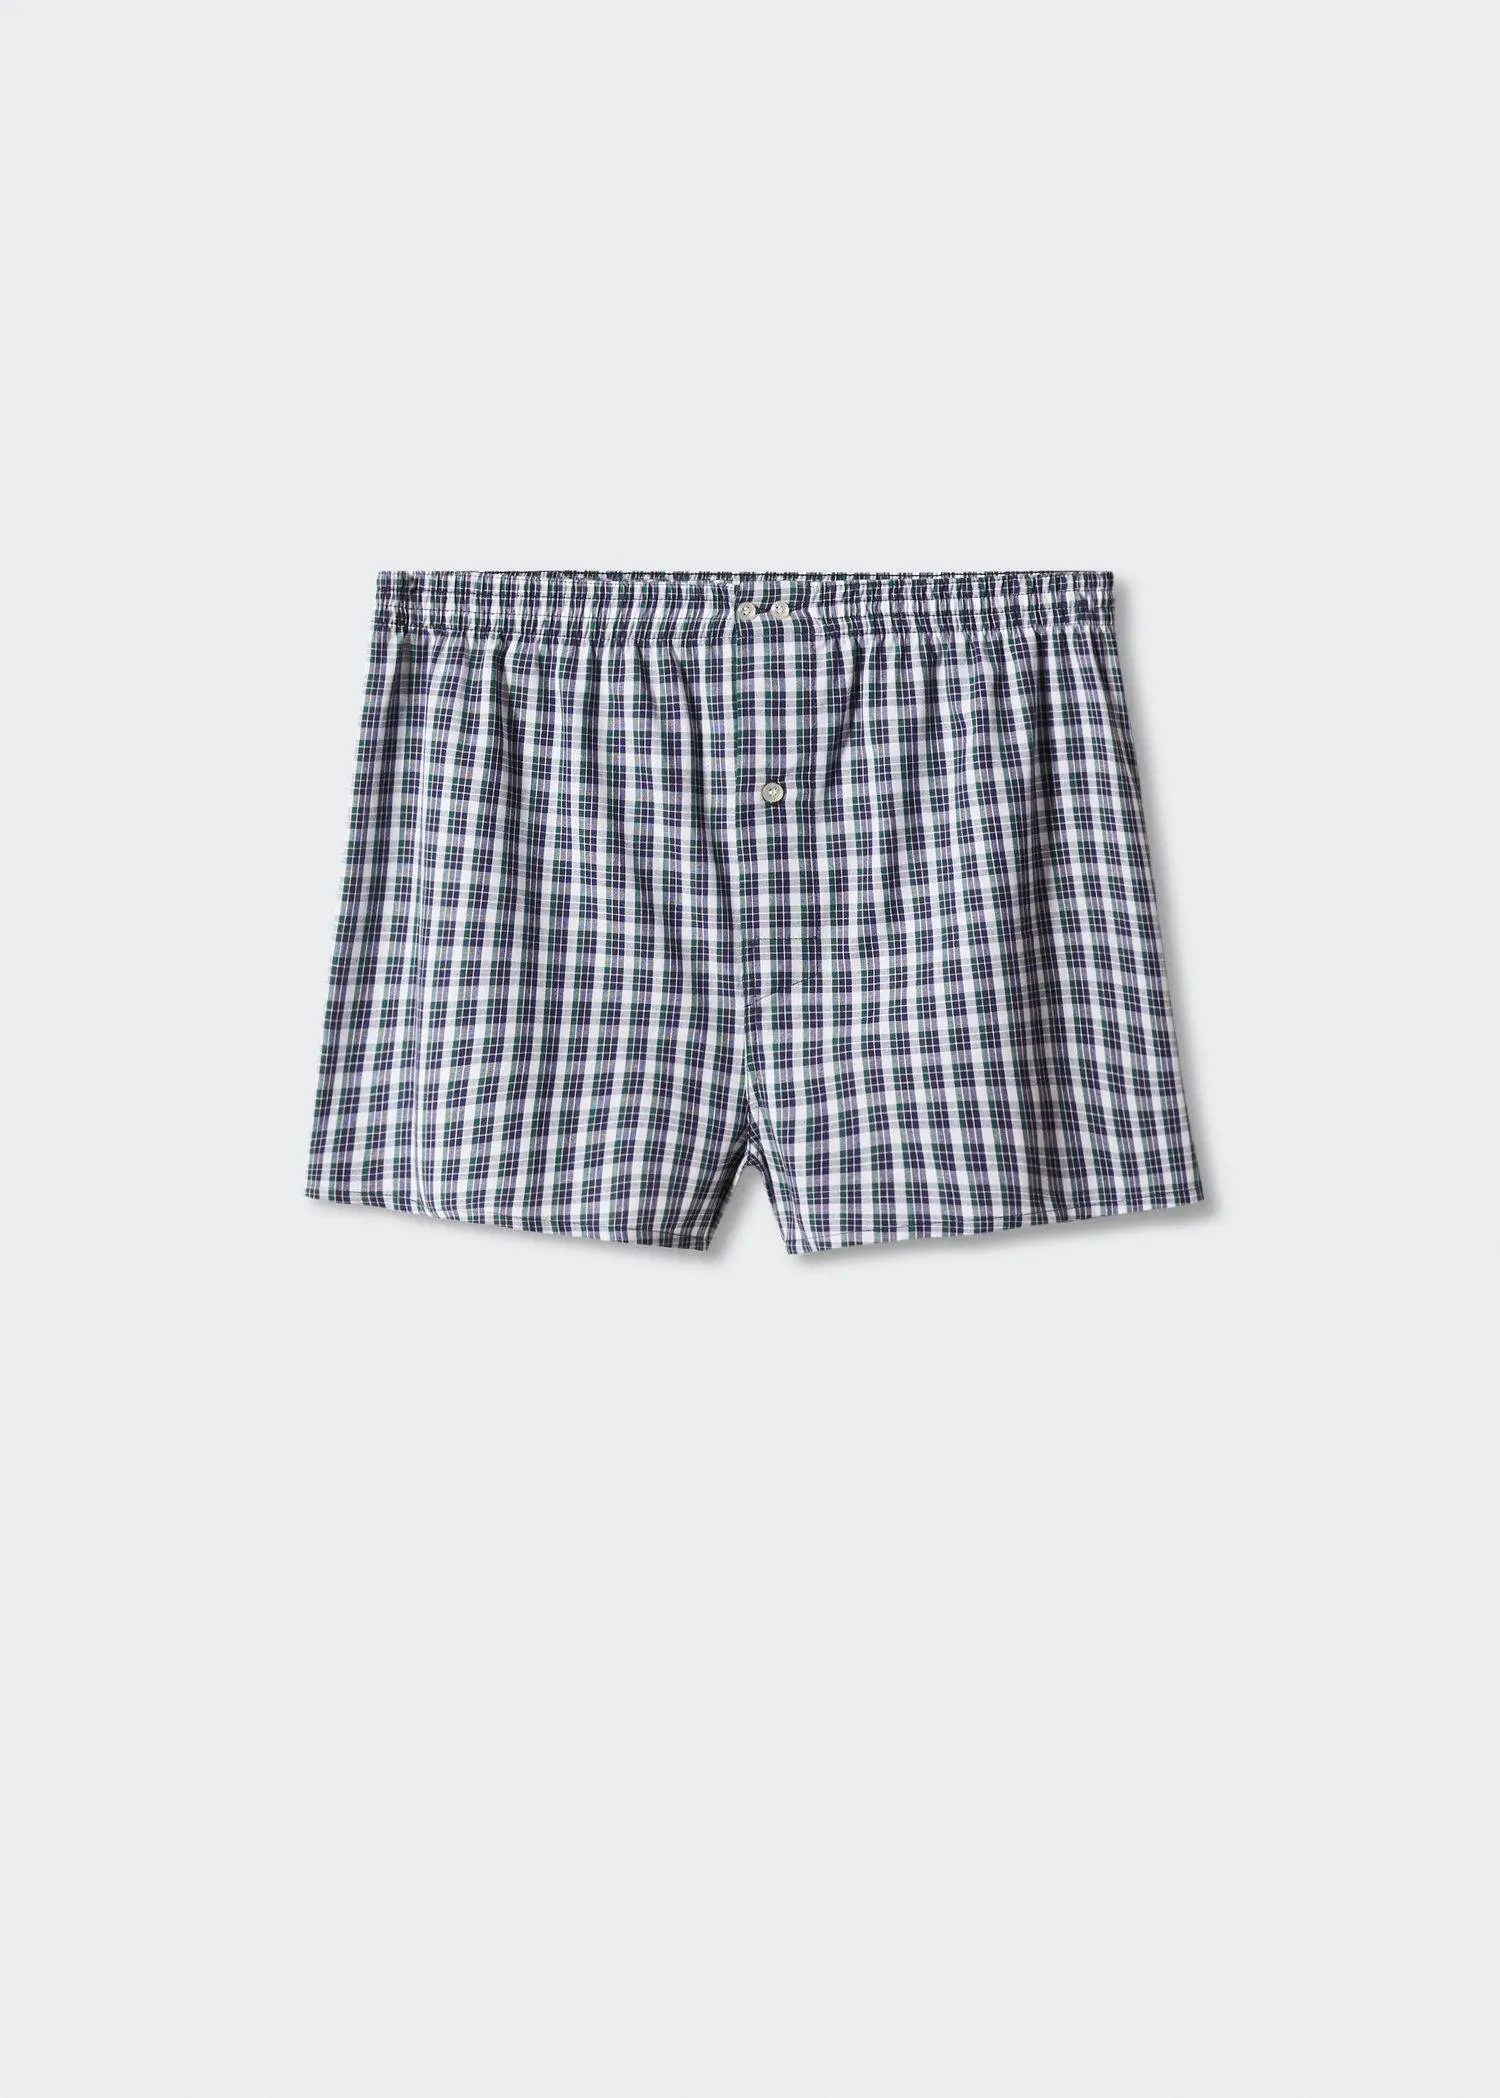 Mango Vichy check cotton briefs. a pair of boxers with a blue and white checkered pattern. 